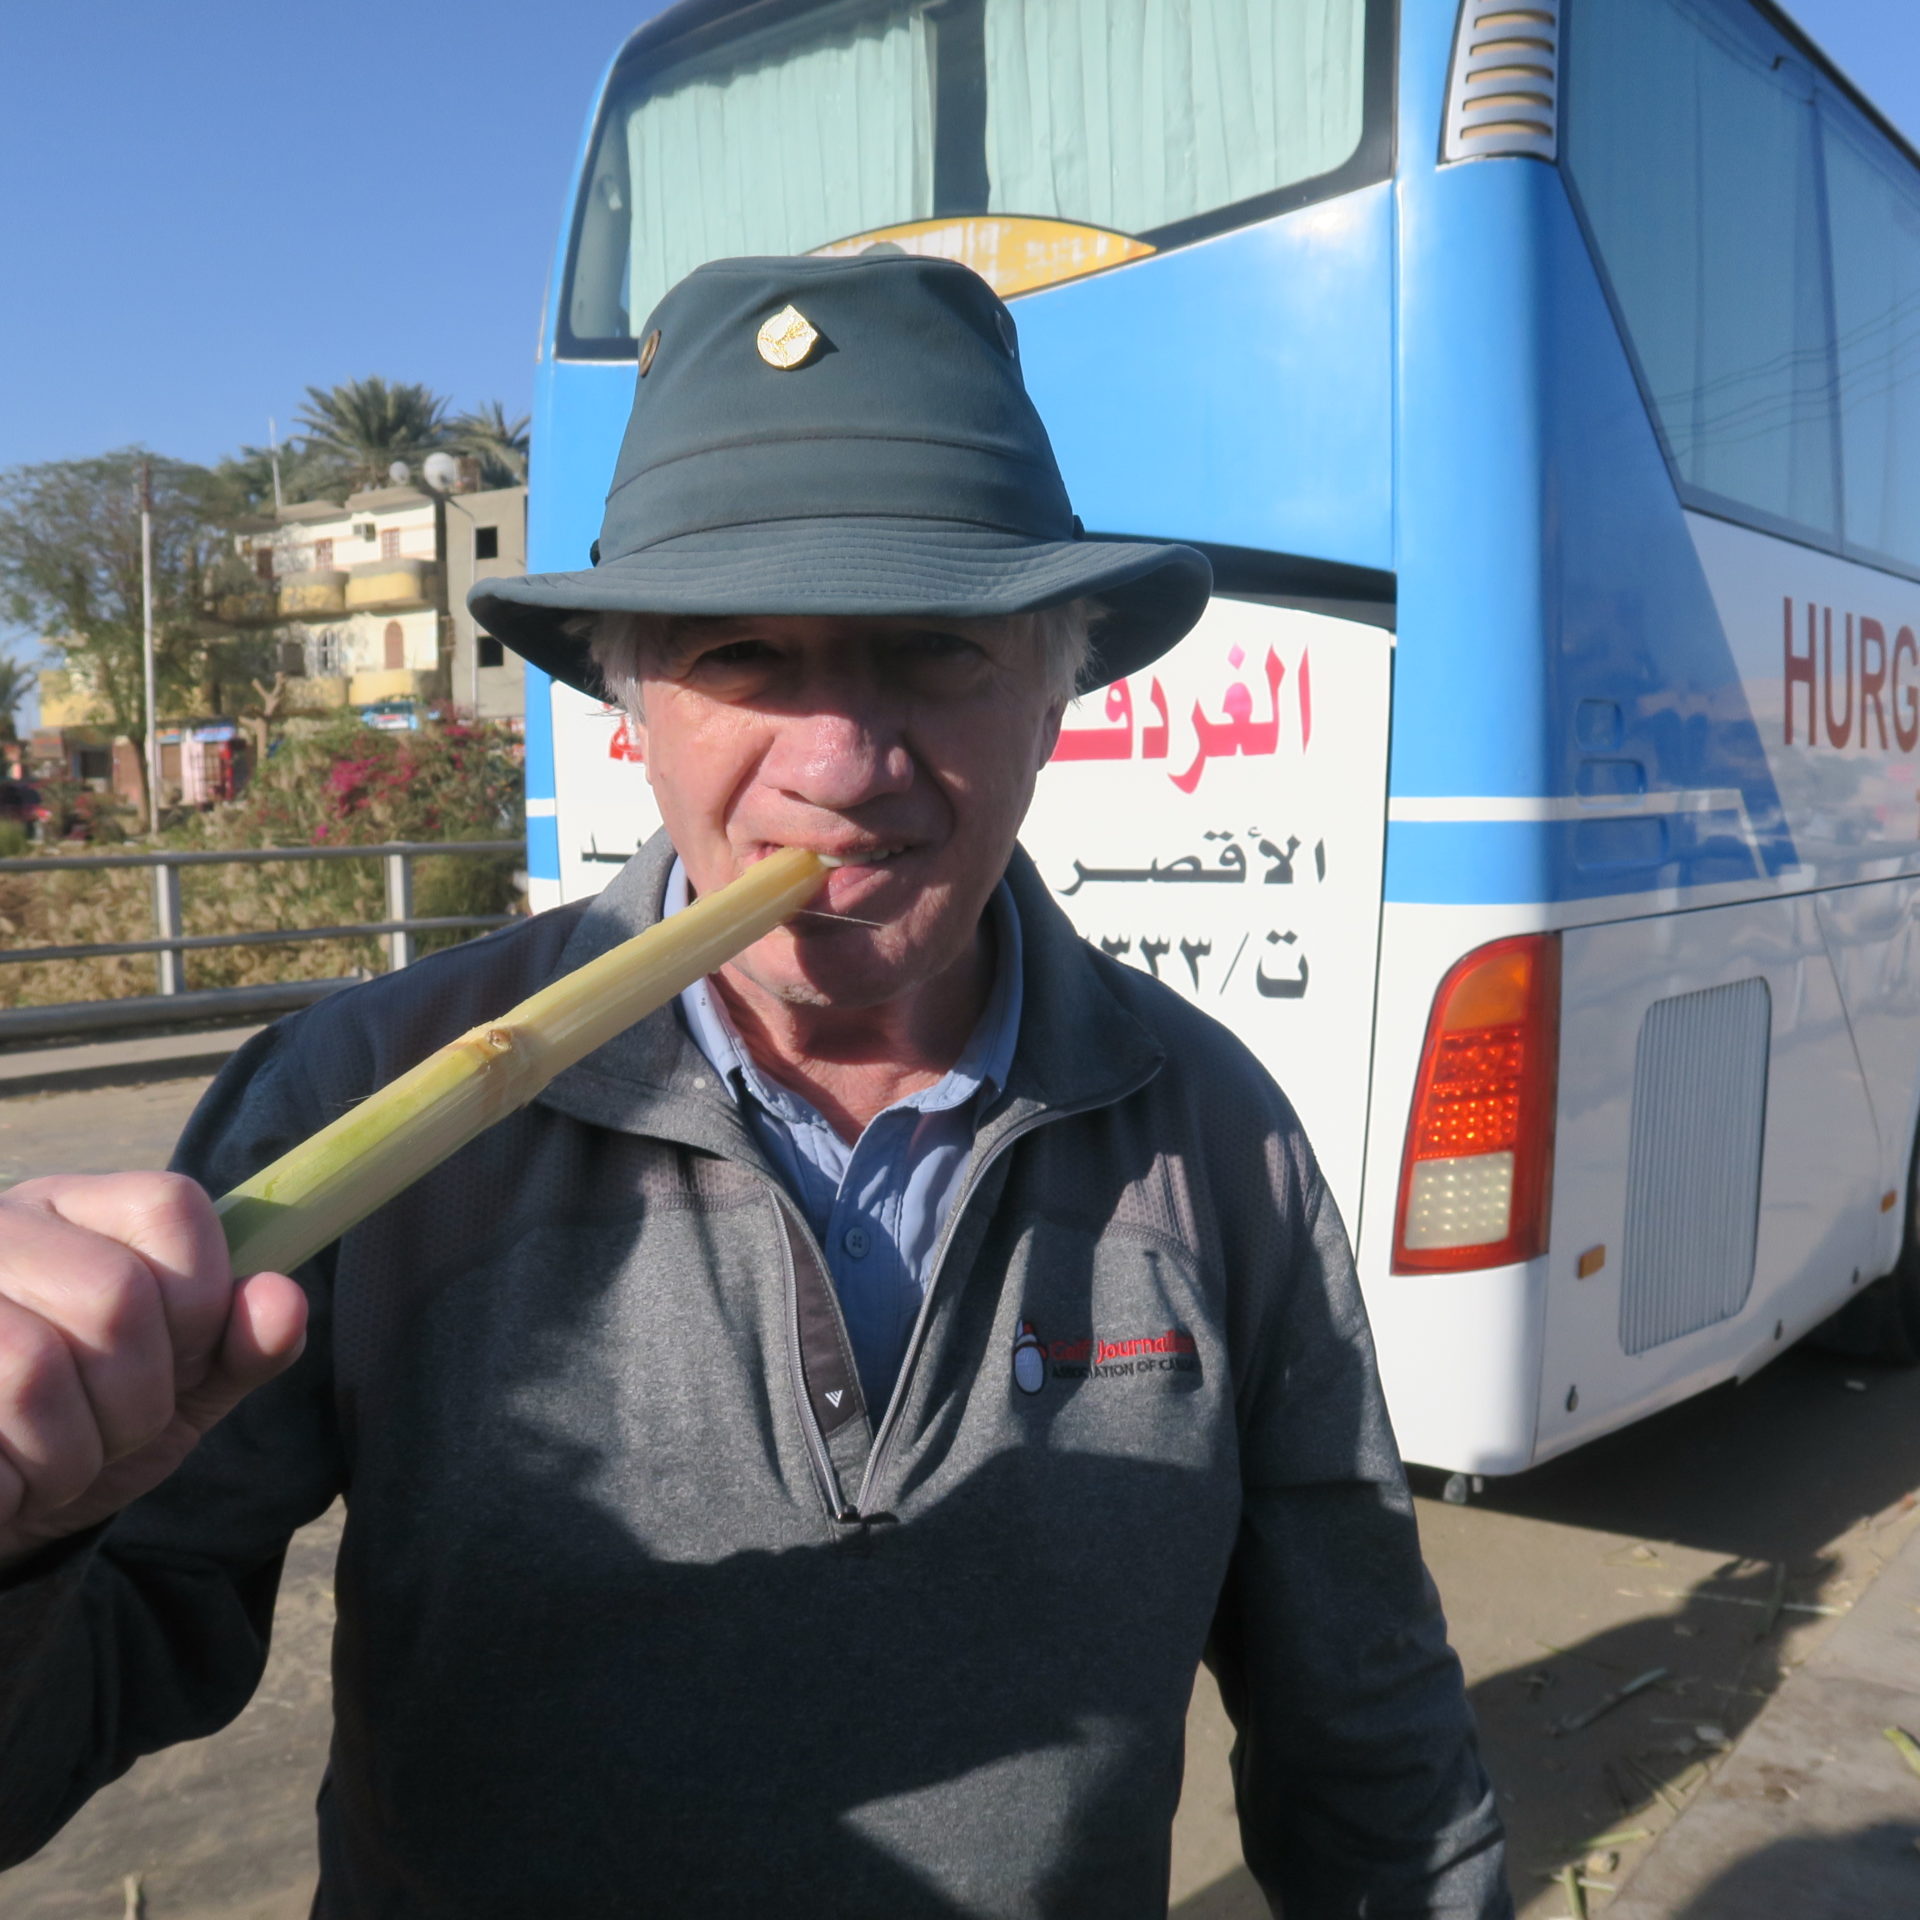 Trying some Egyptian Sugar Cane